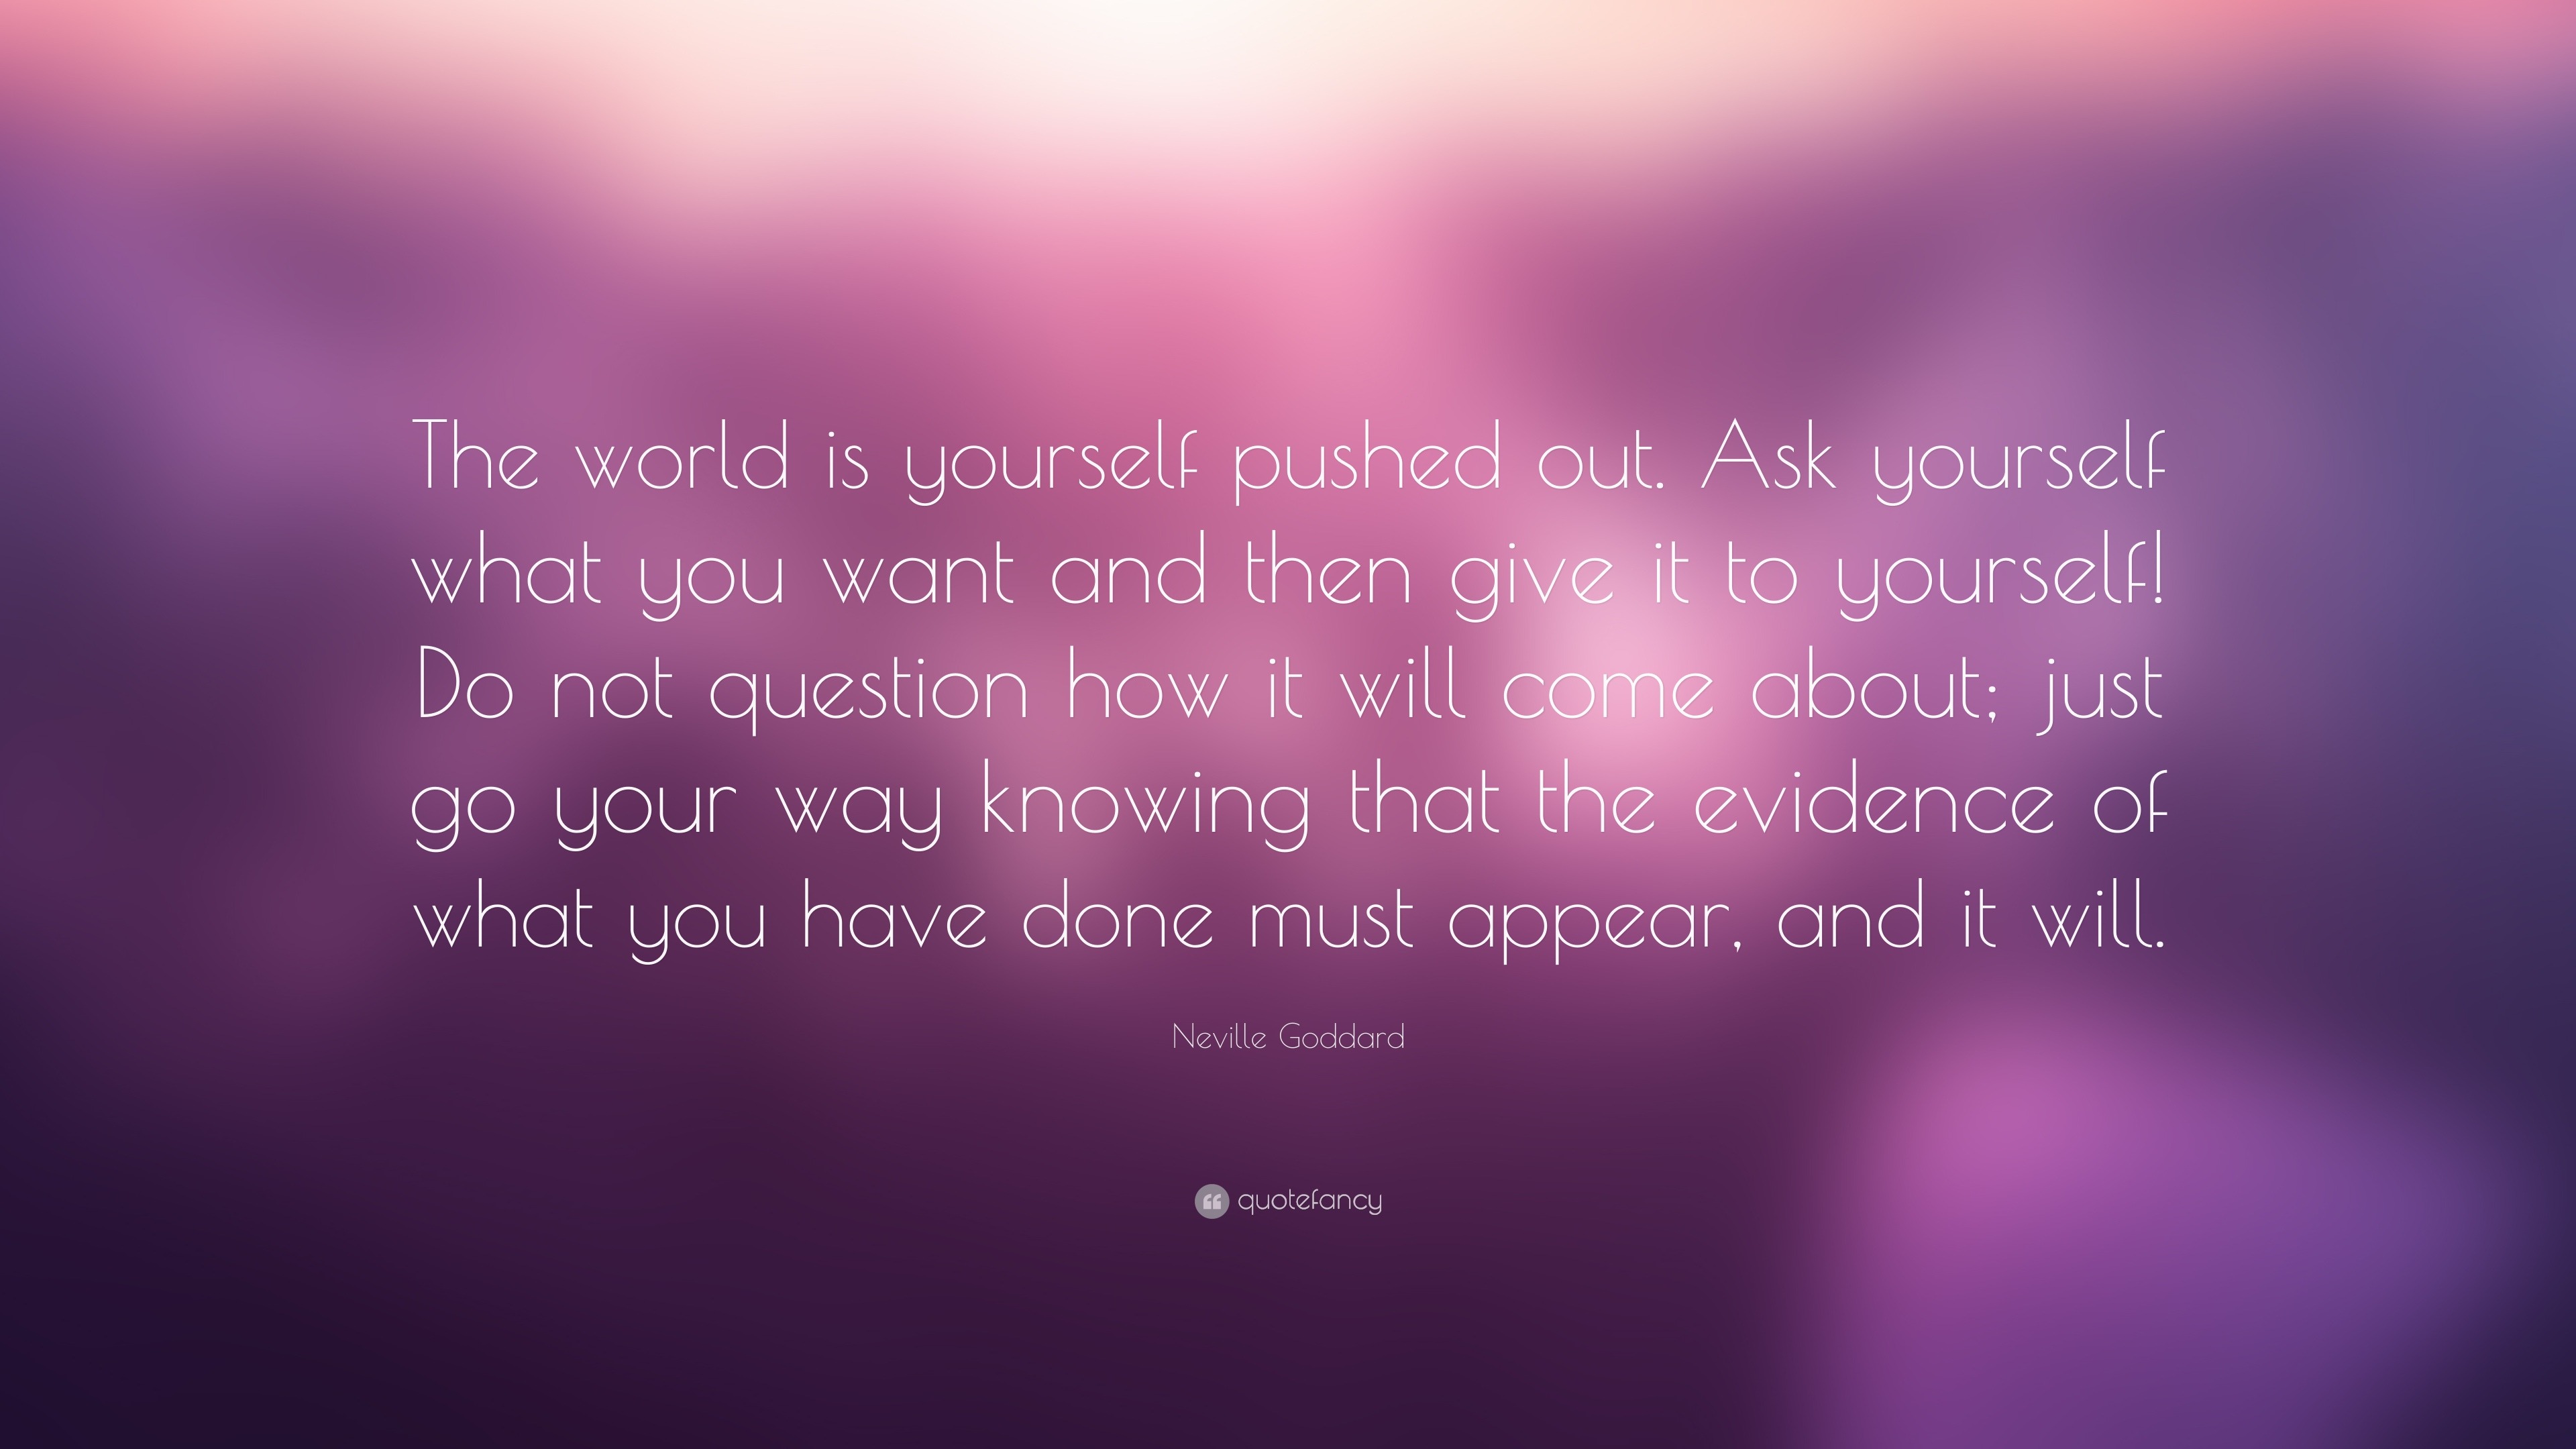 Neville Goddard Quote: “The world is yourself pushed out. Ask yourself what  you want and then give it to yourself! Do not question how it will c...”